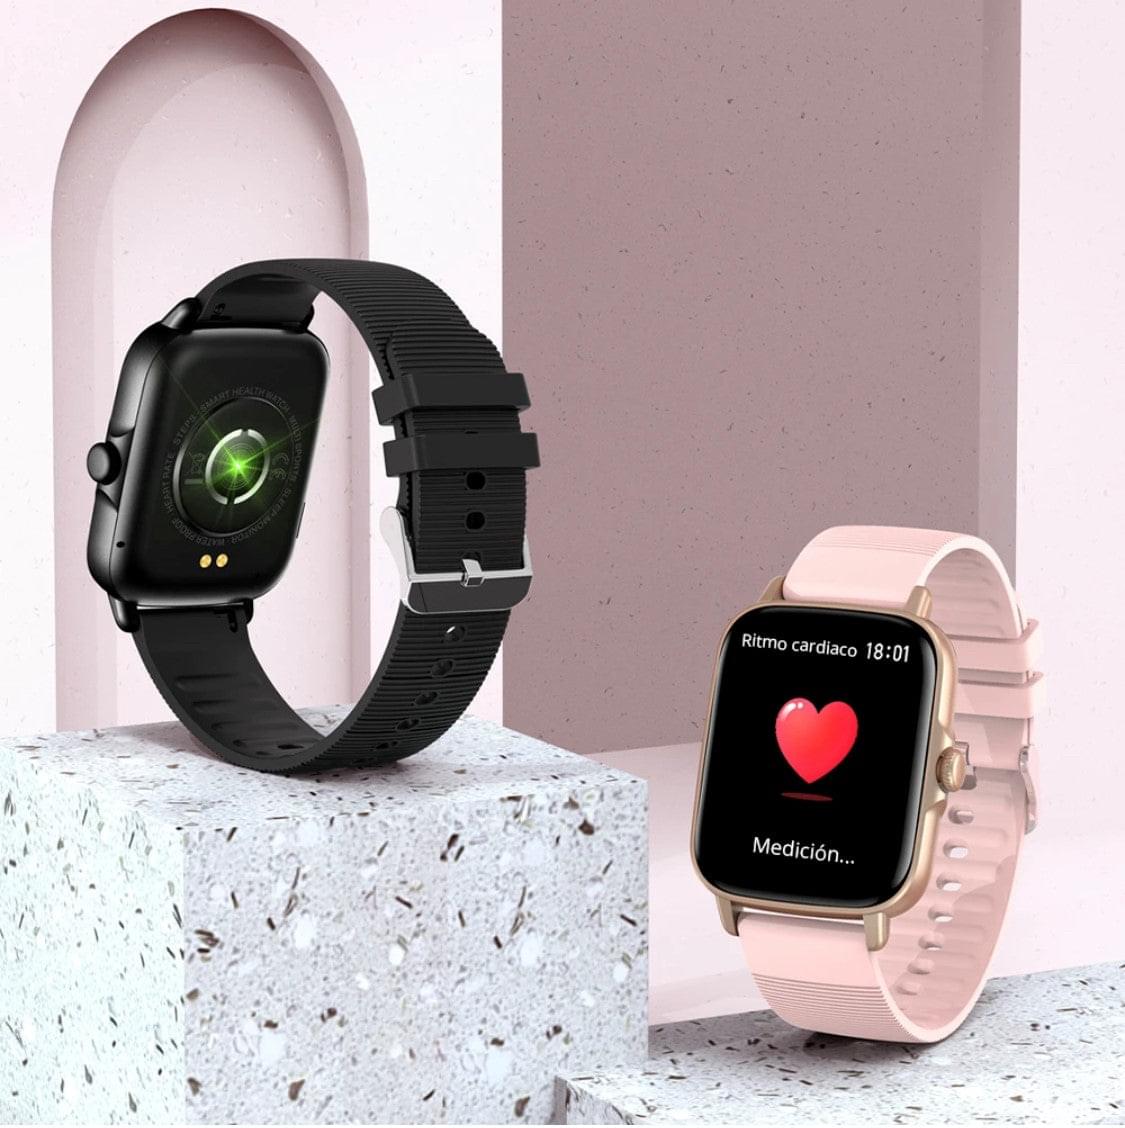 Colmi P30 Pink Gold Smart Watch South Africa